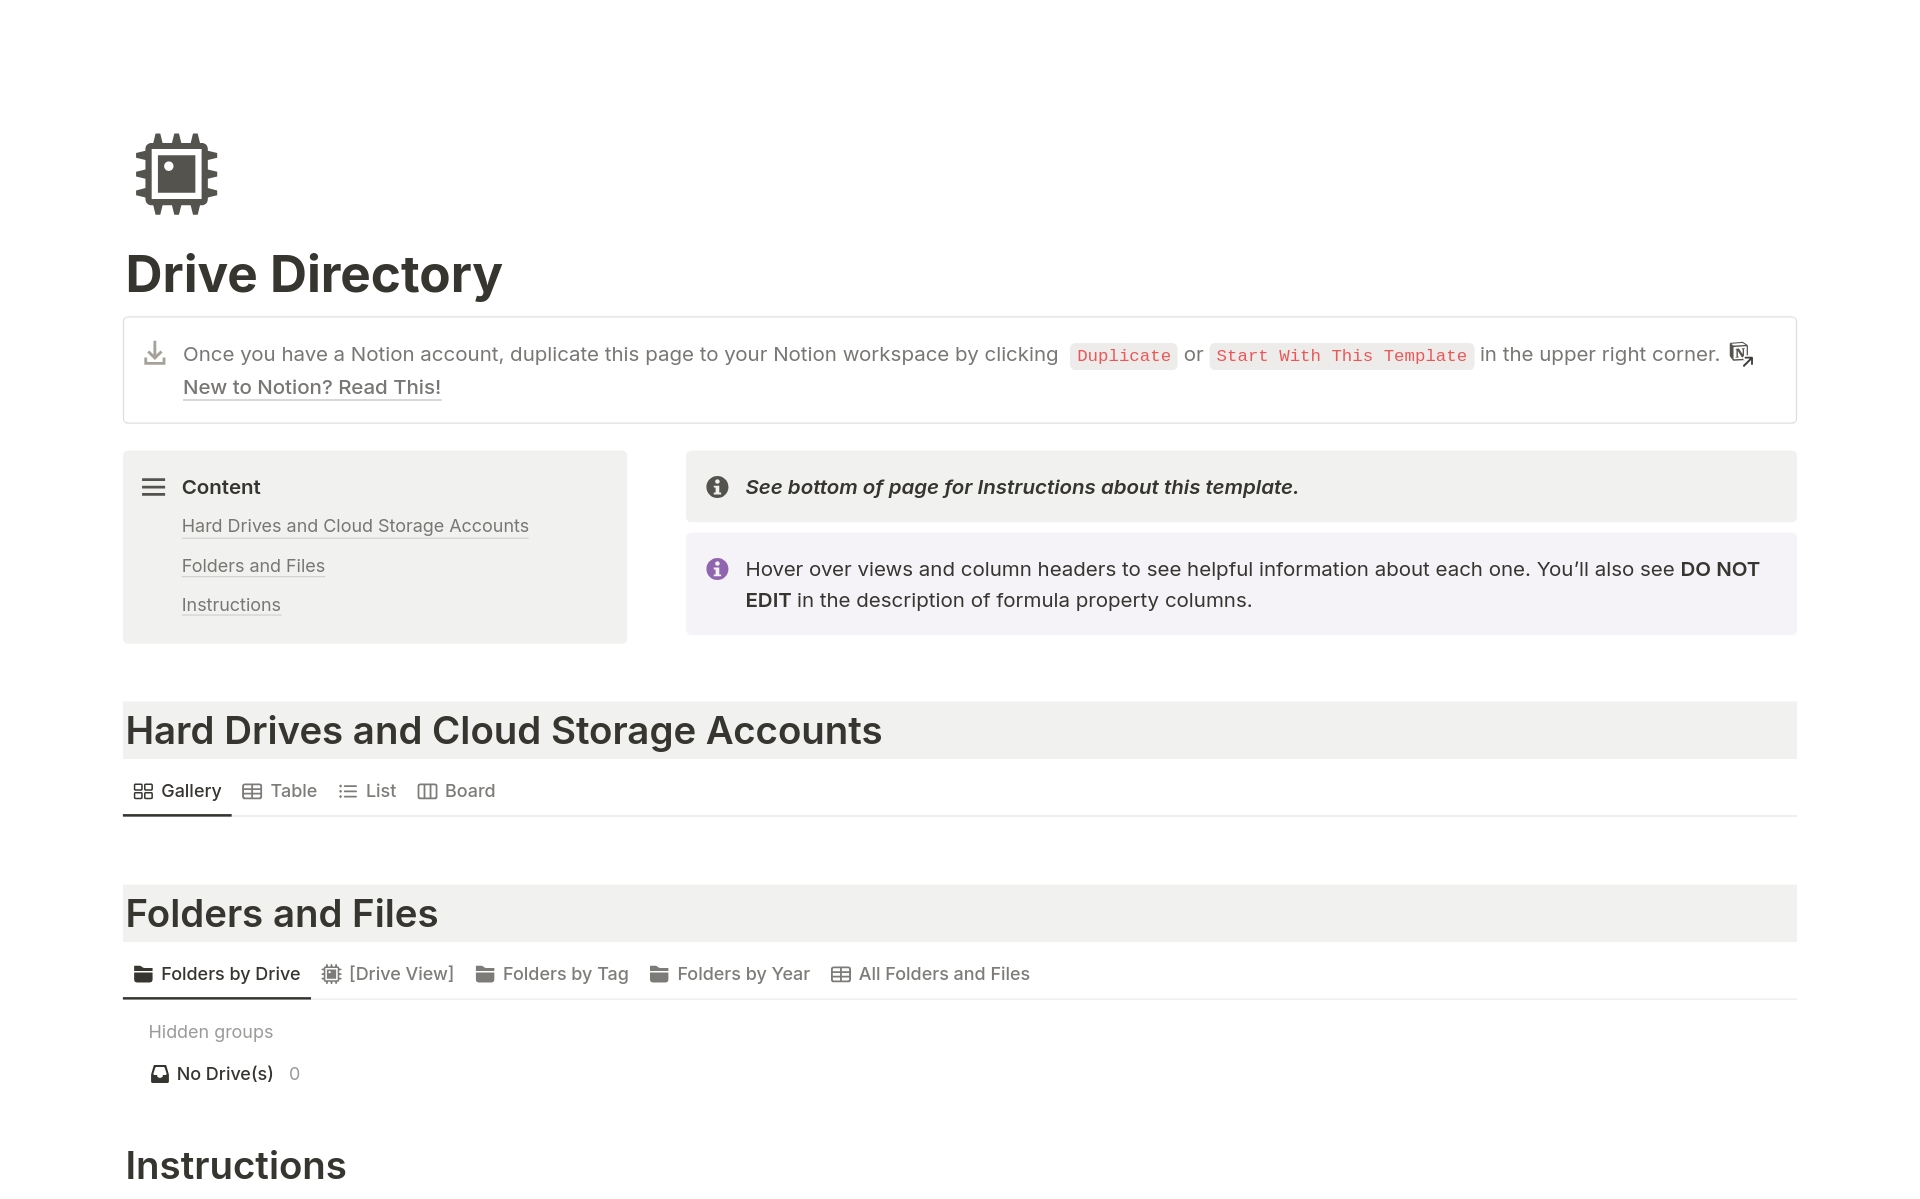 A Hard Drive and Cloud Storage Directory that helps manage your digital storage, keeping track of which files are stored where without the hassle of searching multiple locations. Perfect for project organization - log everything once, and stop plugging in those drives every time!